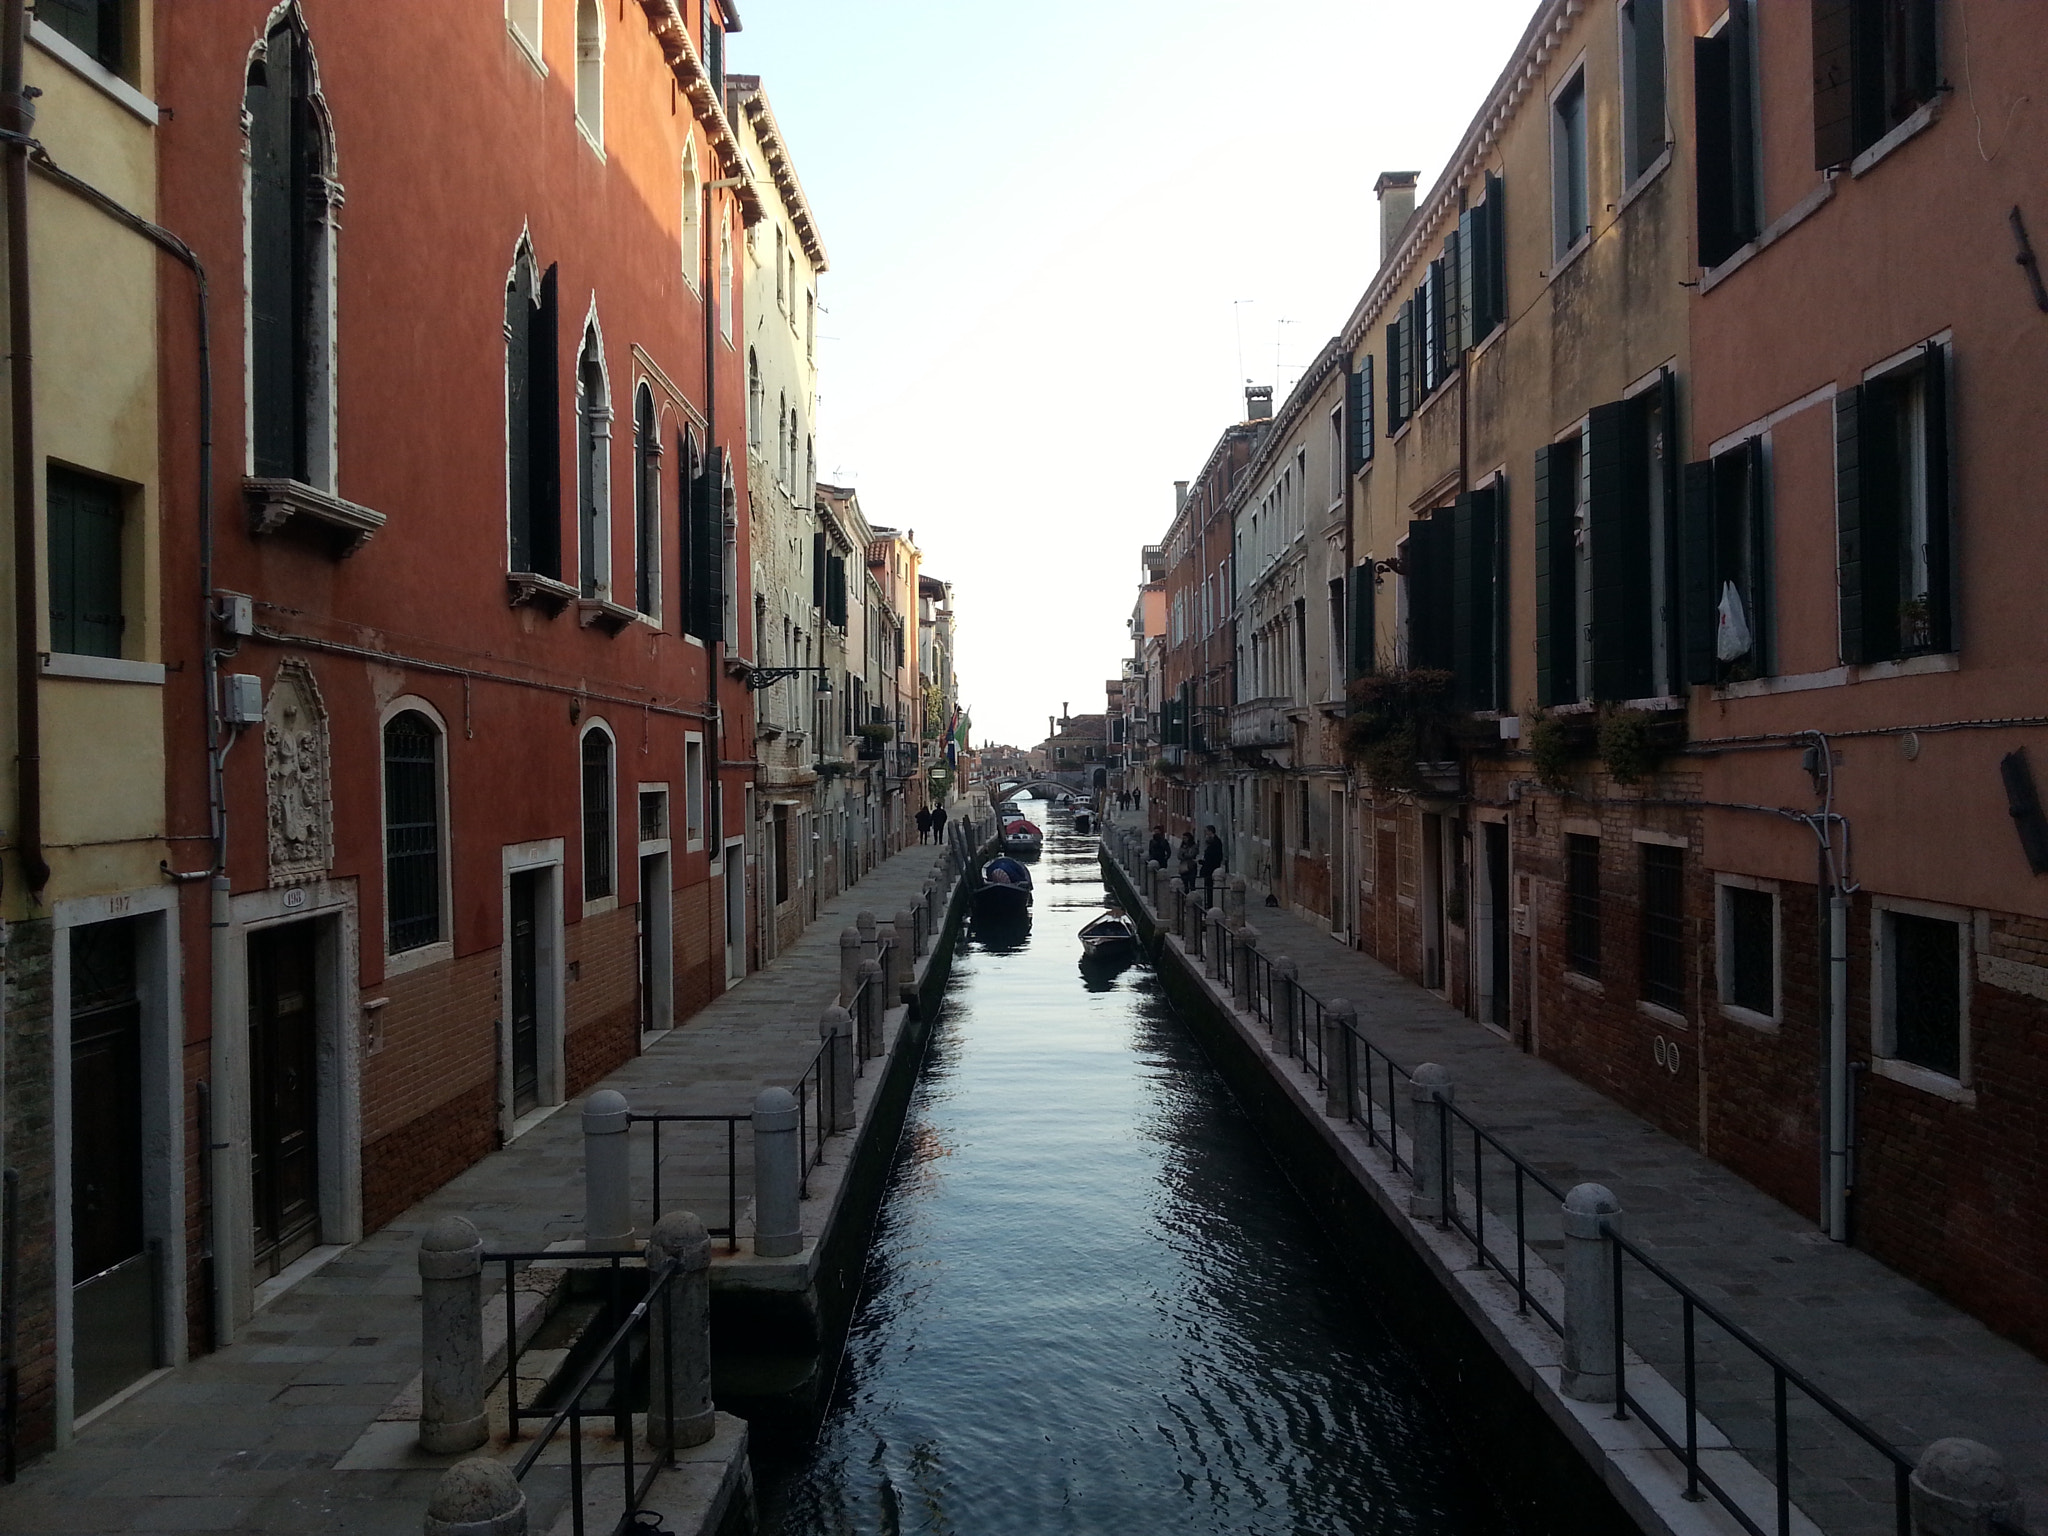 Samsung GT-I8750 sample photo. Imagine this canal alive photography